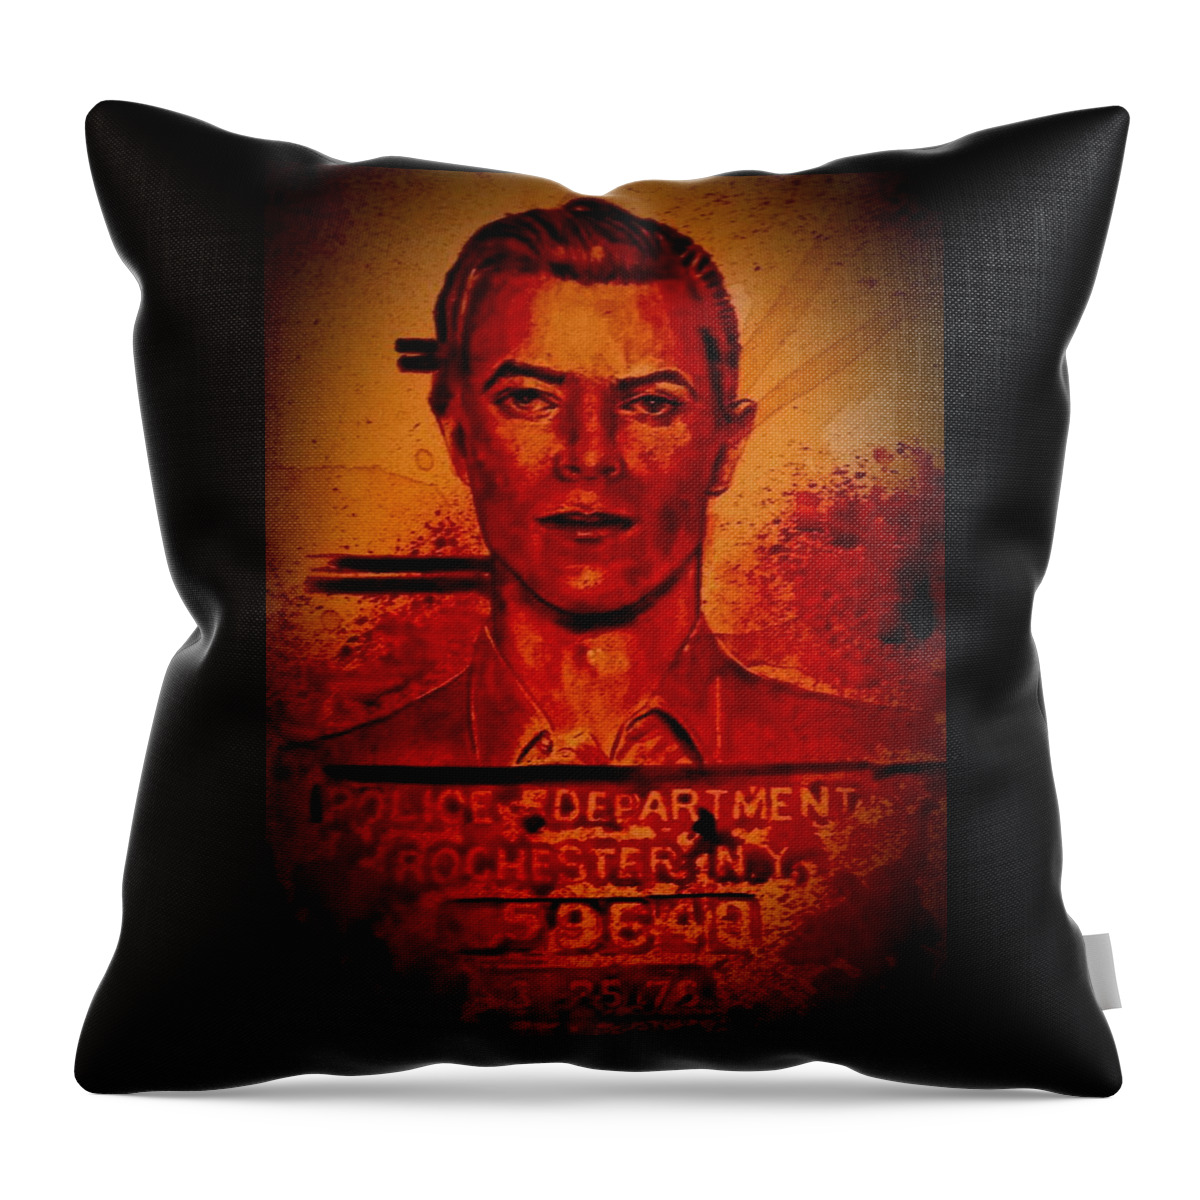 David Bowie Throw Pillow featuring the painting DAVID BOWIE MUGSHOT 1976 - fresh blood by Ryan Almighty